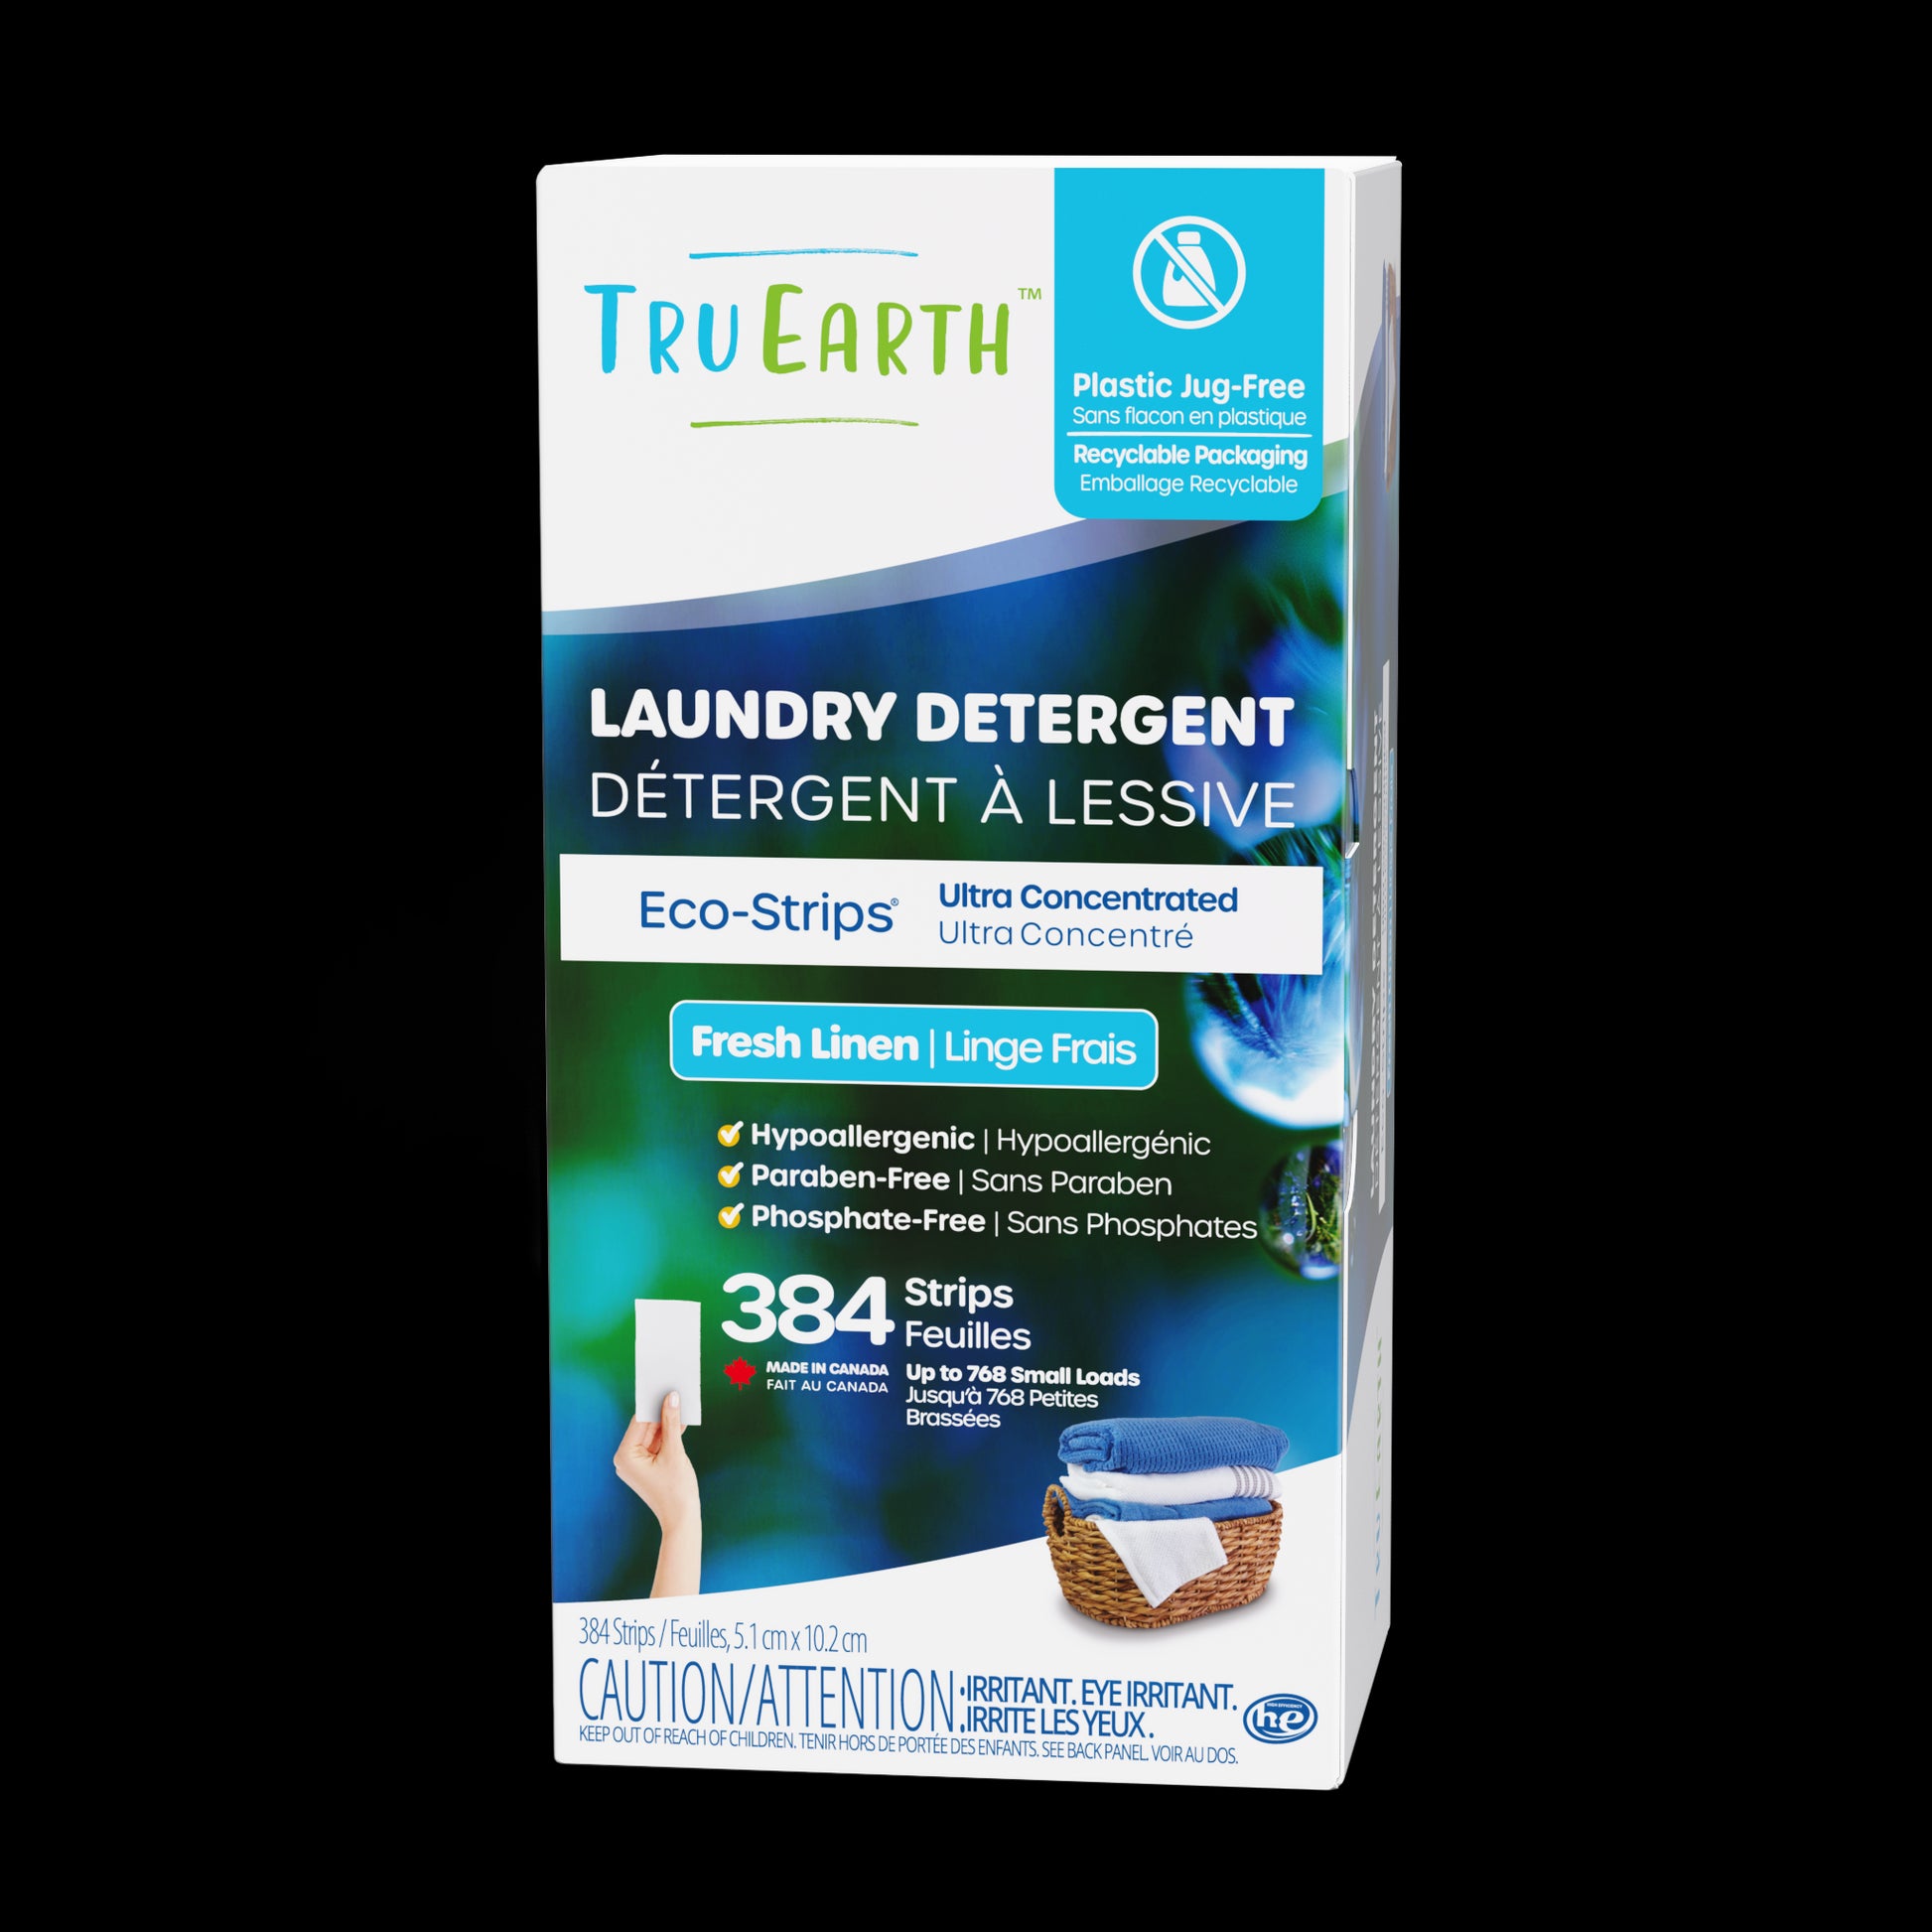 TruEarth Laundry Detergent Fresh Linen Front of Package